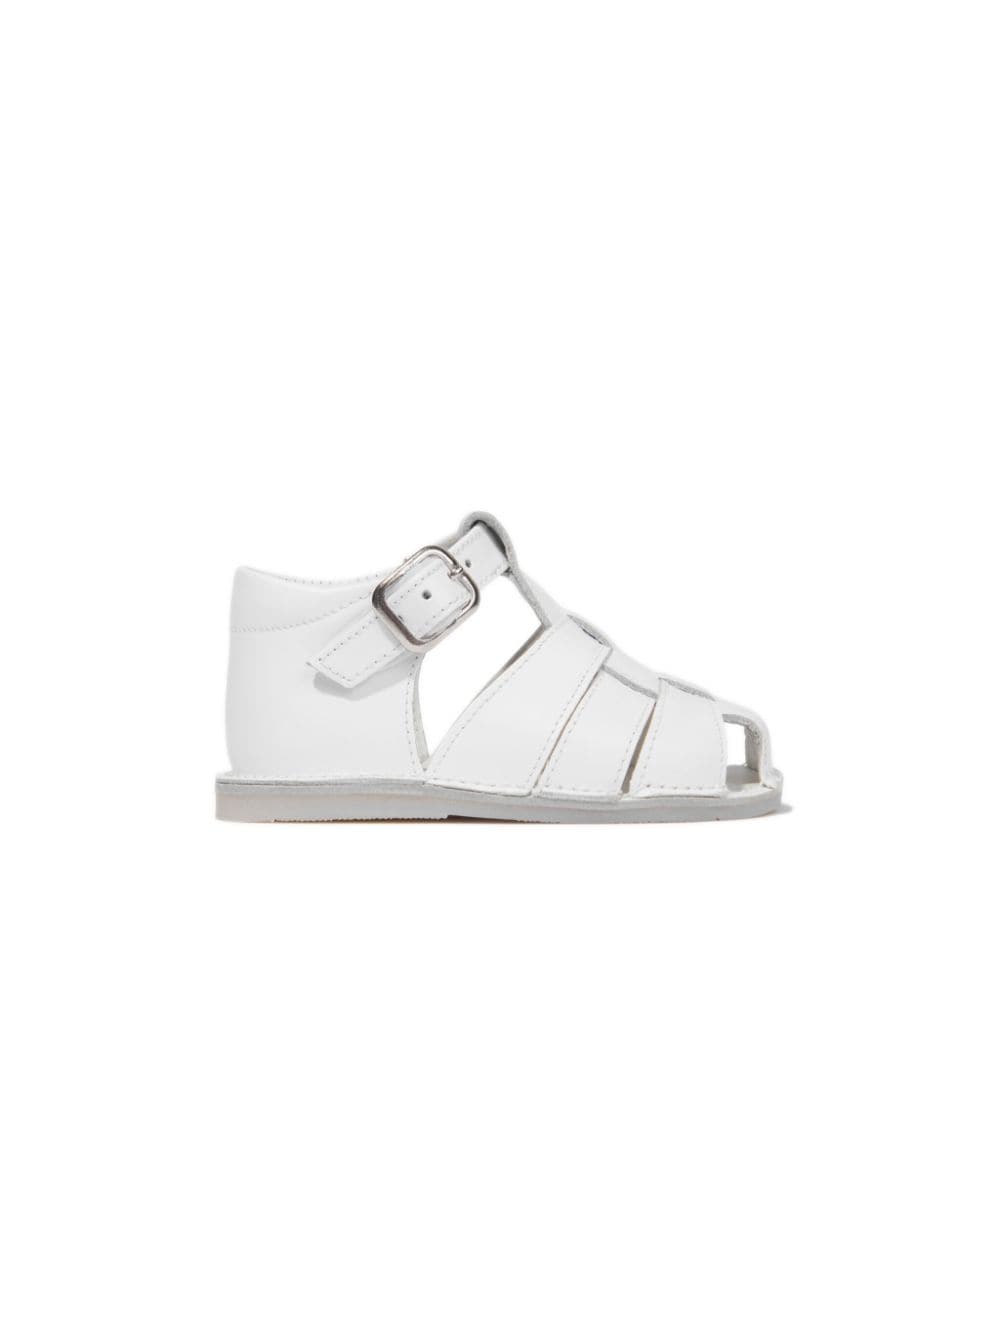 ANDANINES caged leather sandals - White von ANDANINES